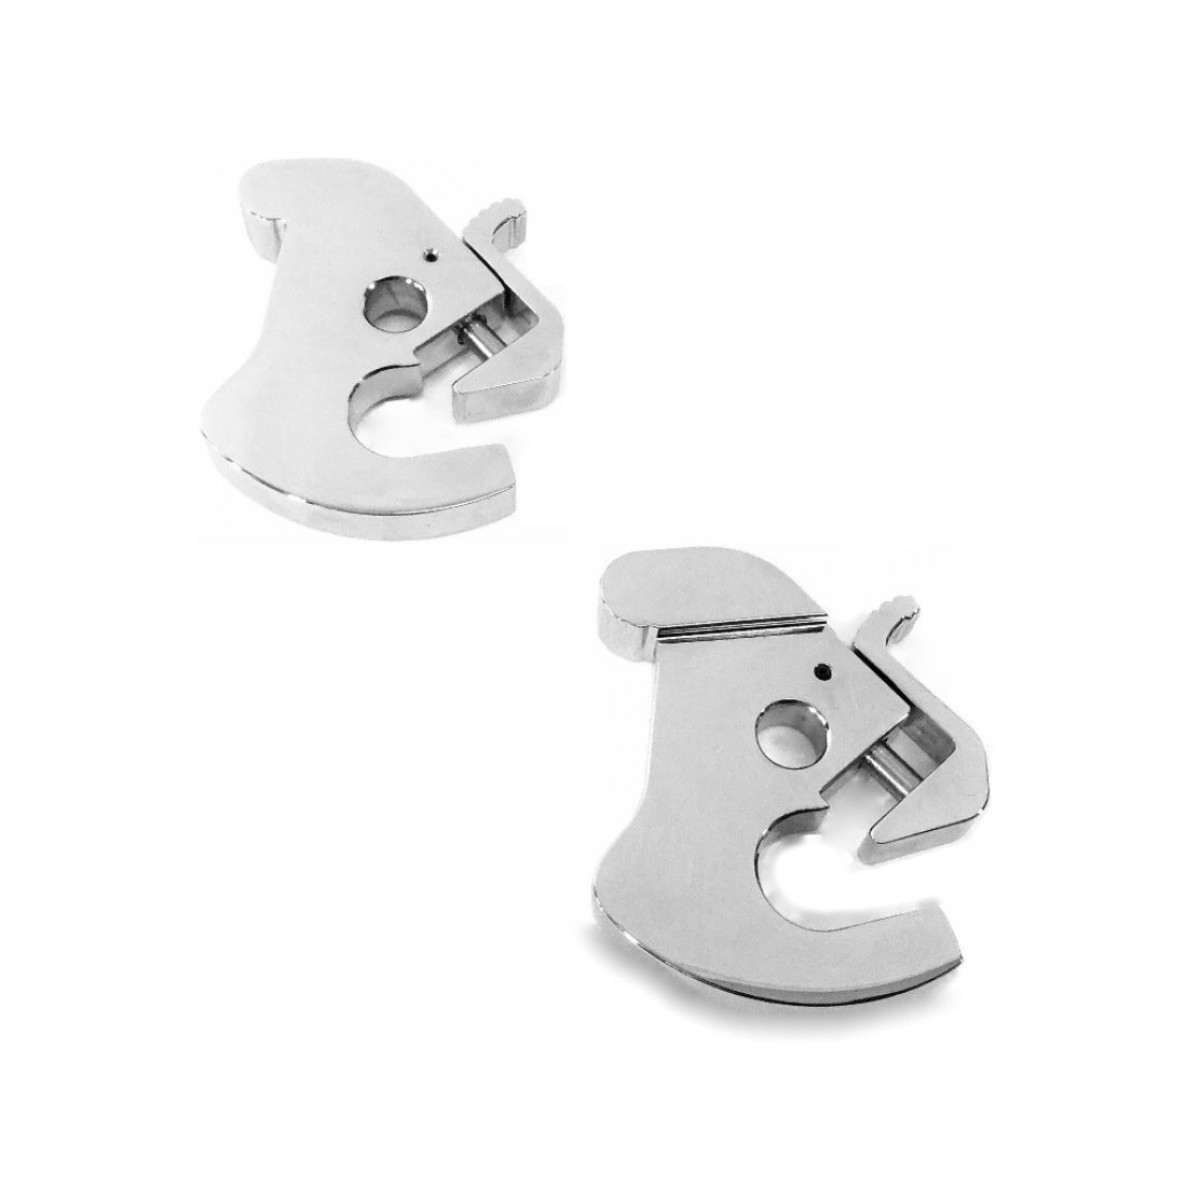 Chrome Rotary Latch Clip Kit for Harley Davidson Motorcycles ...